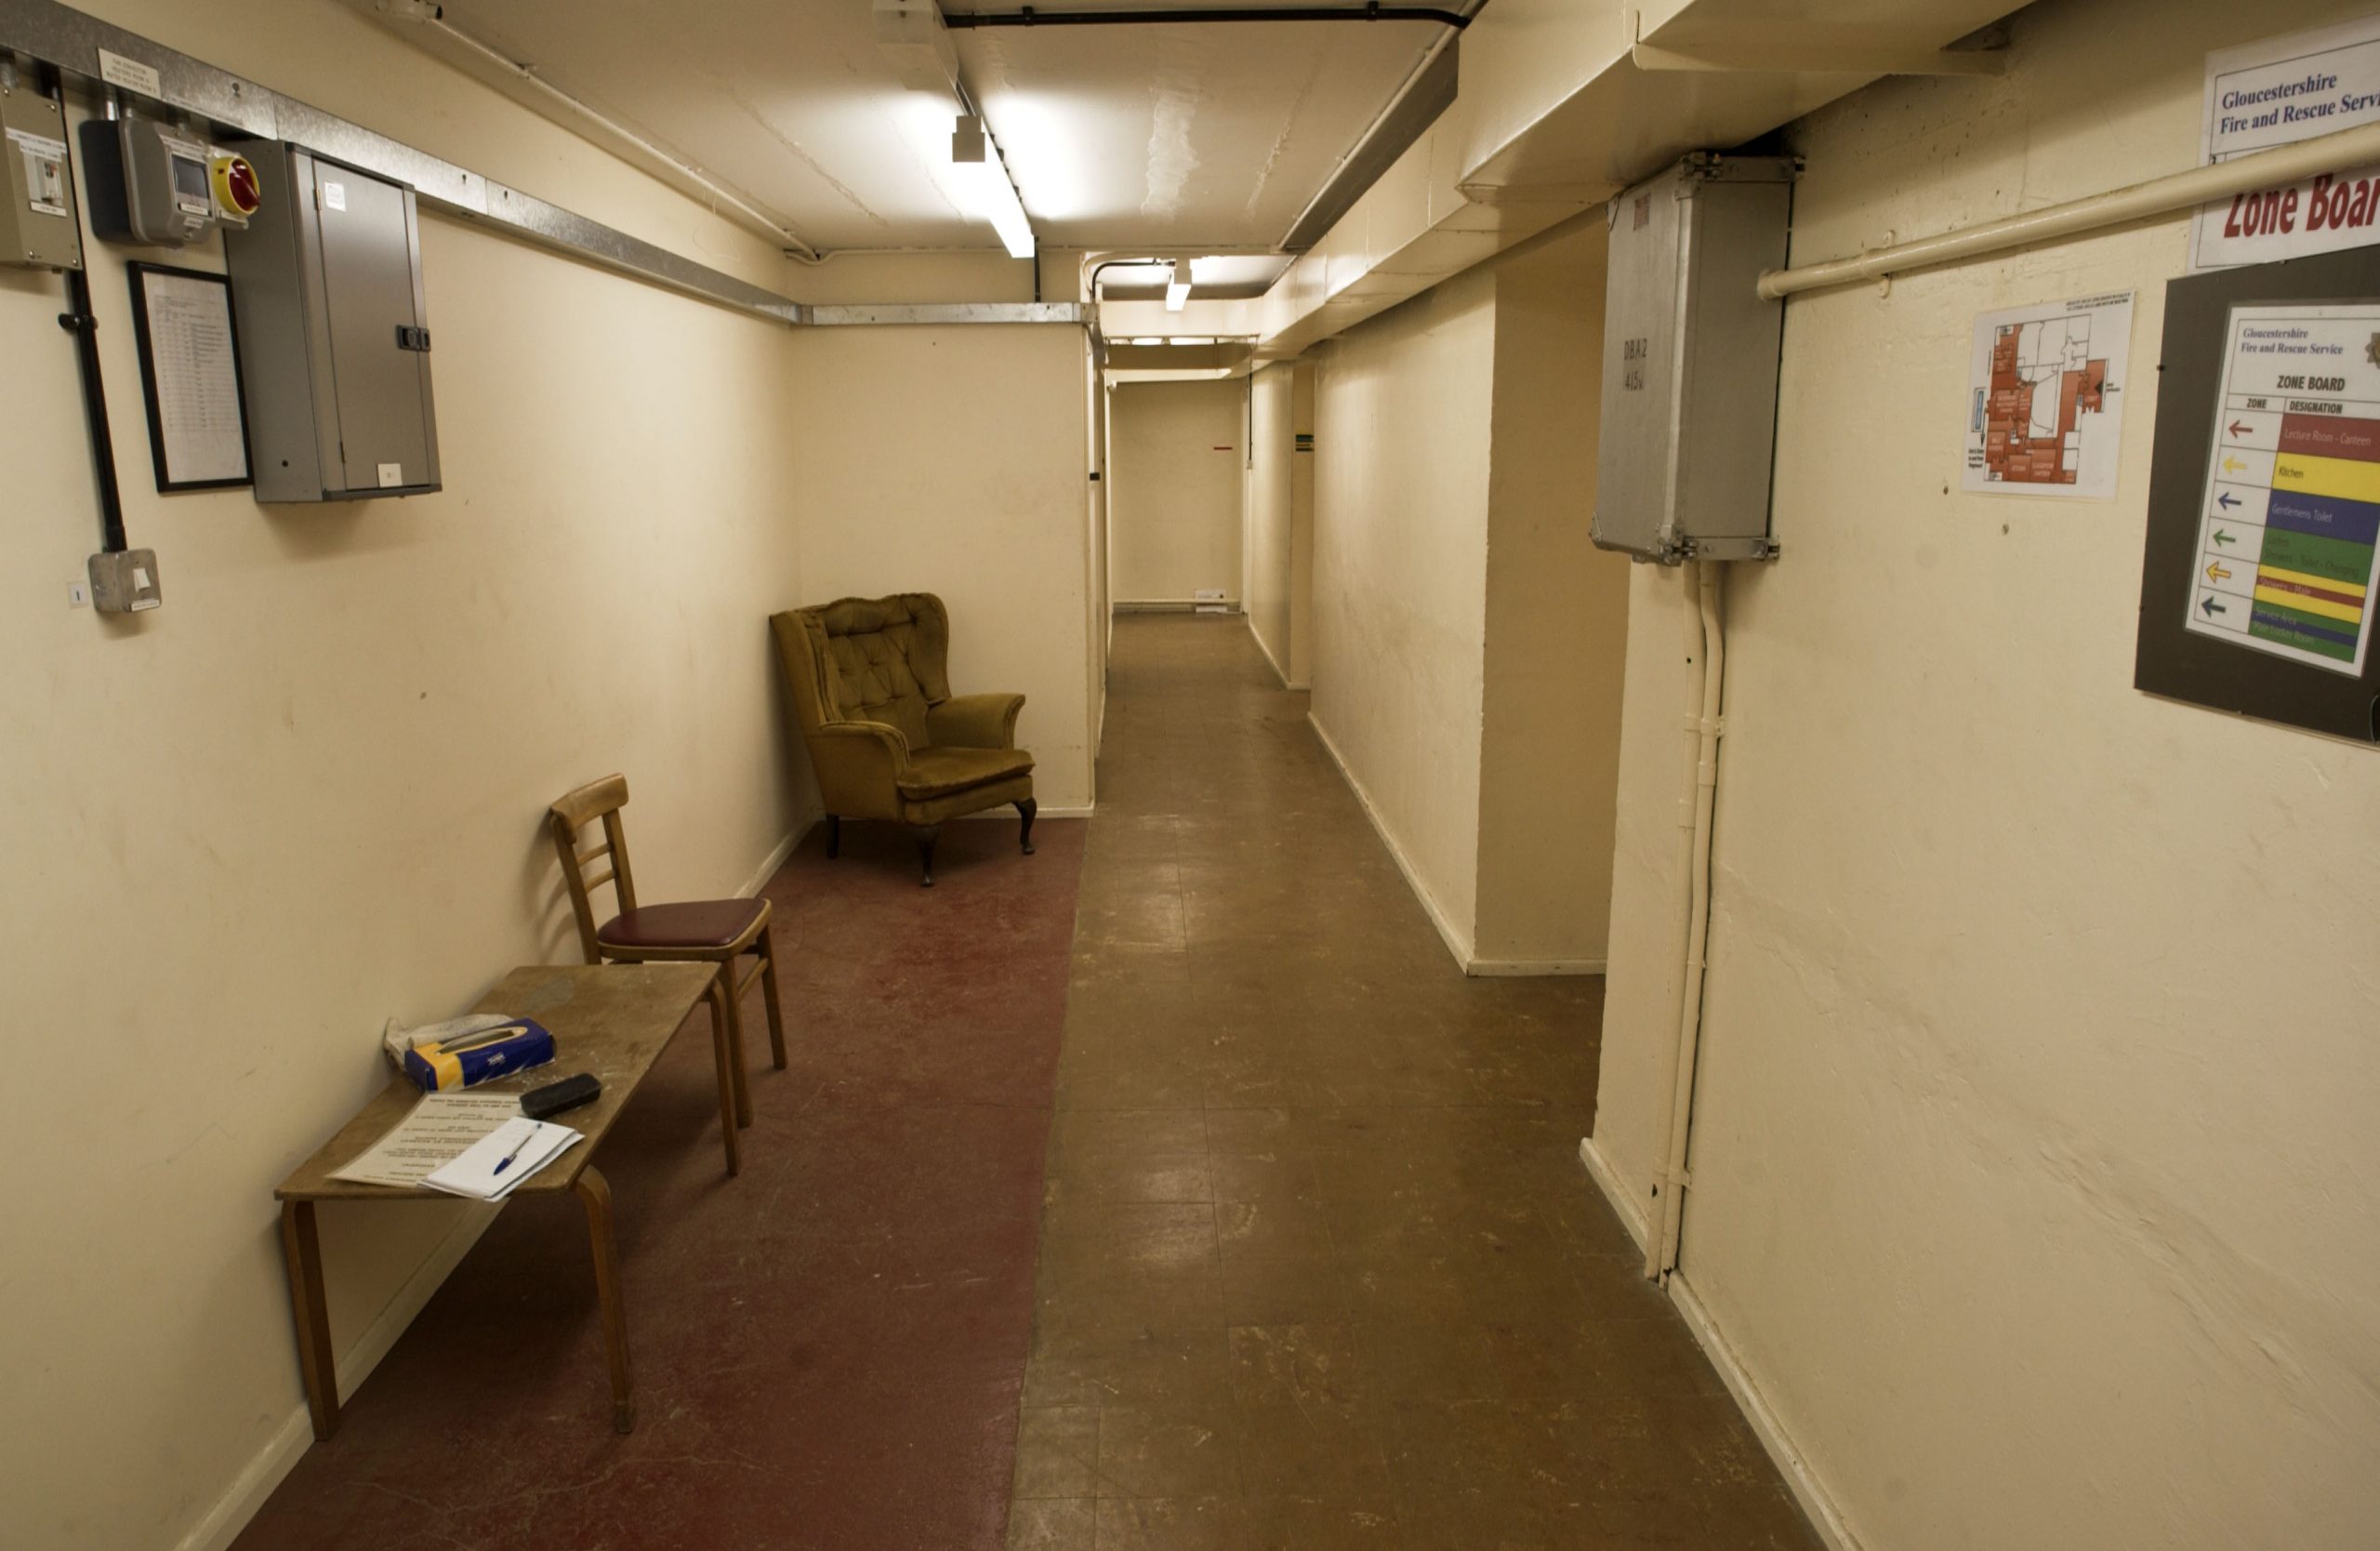 Secret nuclear bunker just 10mins from Cheltenham racecourse has 2ft-thick walls built to protect PM from apocalypse